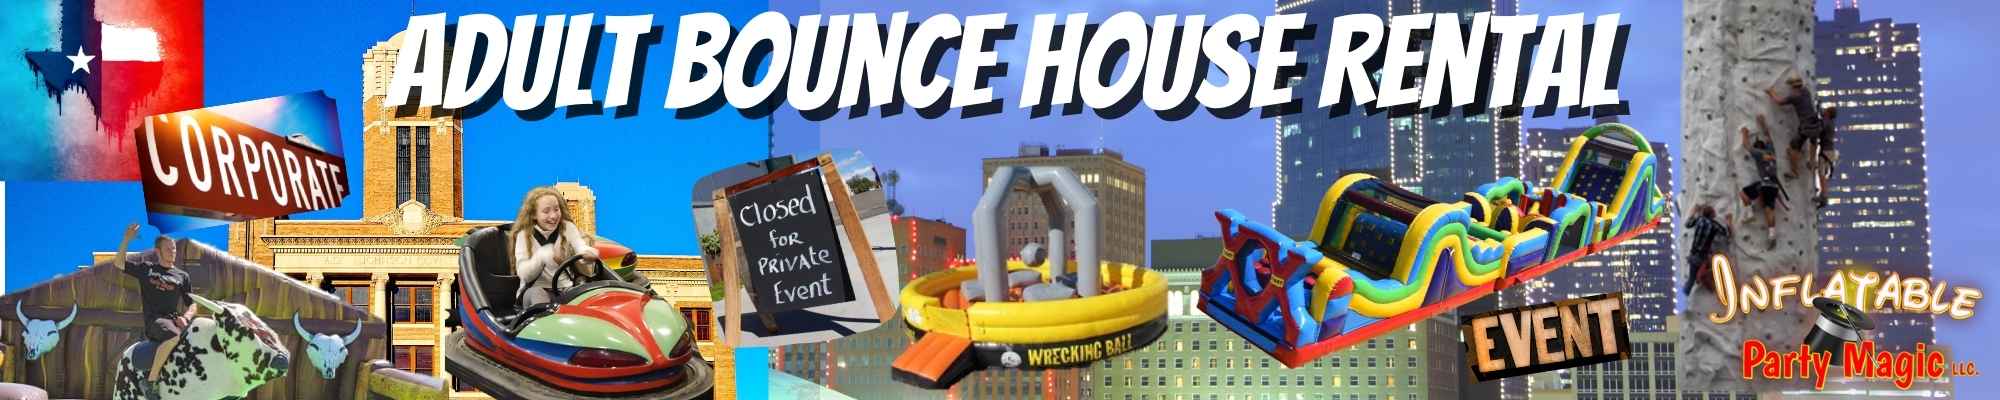 Bounce Houses for Adults